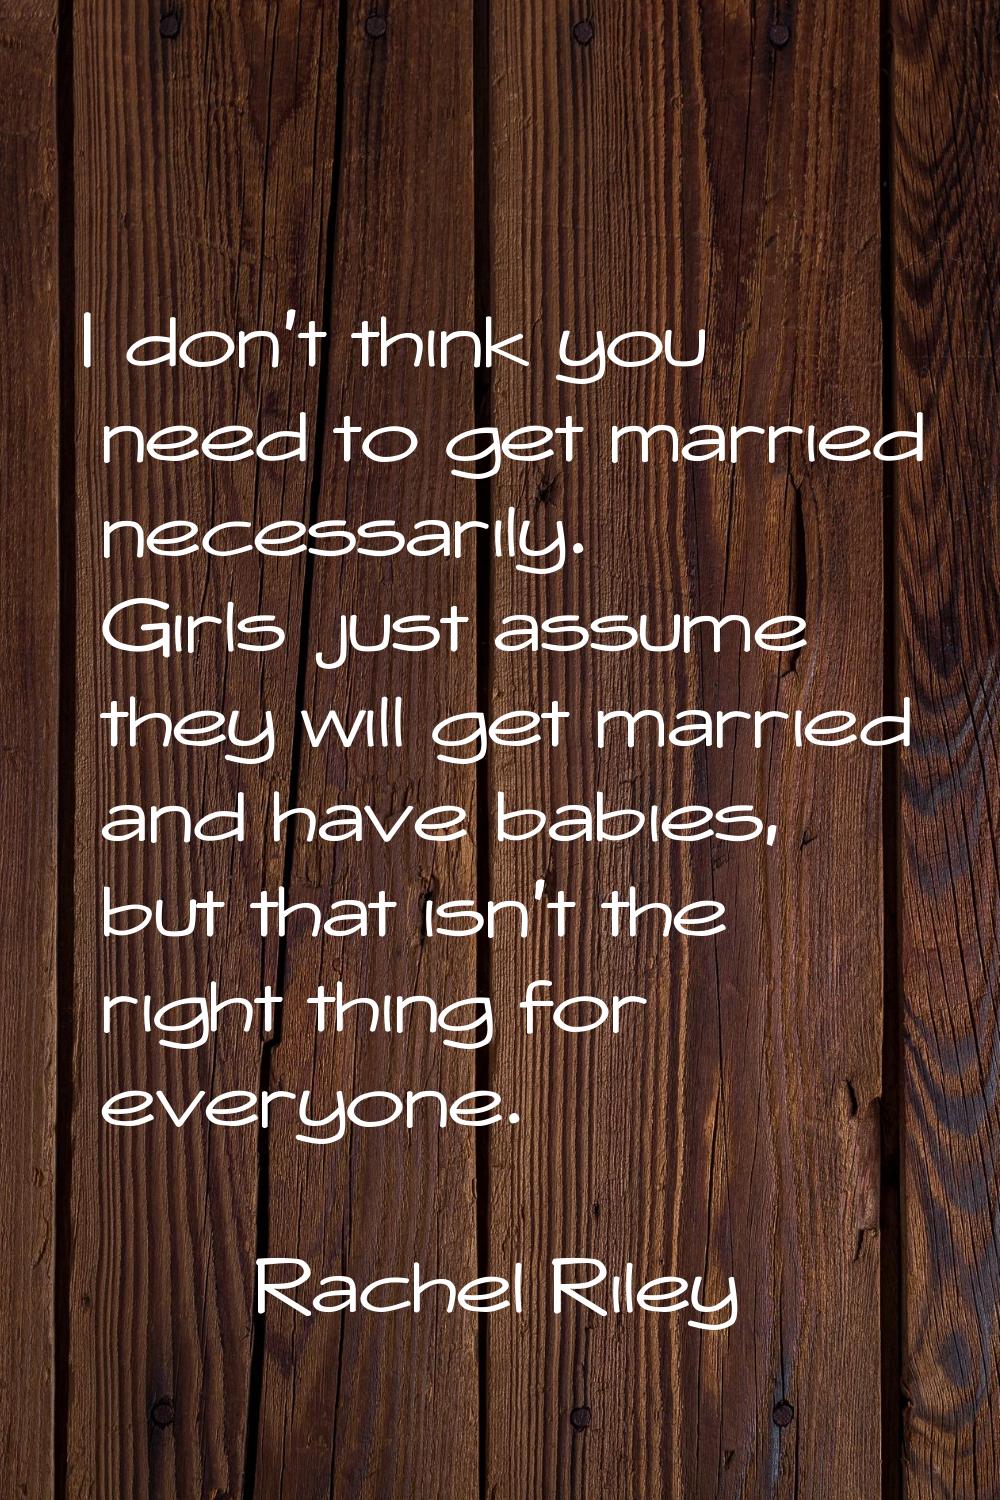 I don't think you need to get married necessarily. Girls just assume they will get married and have